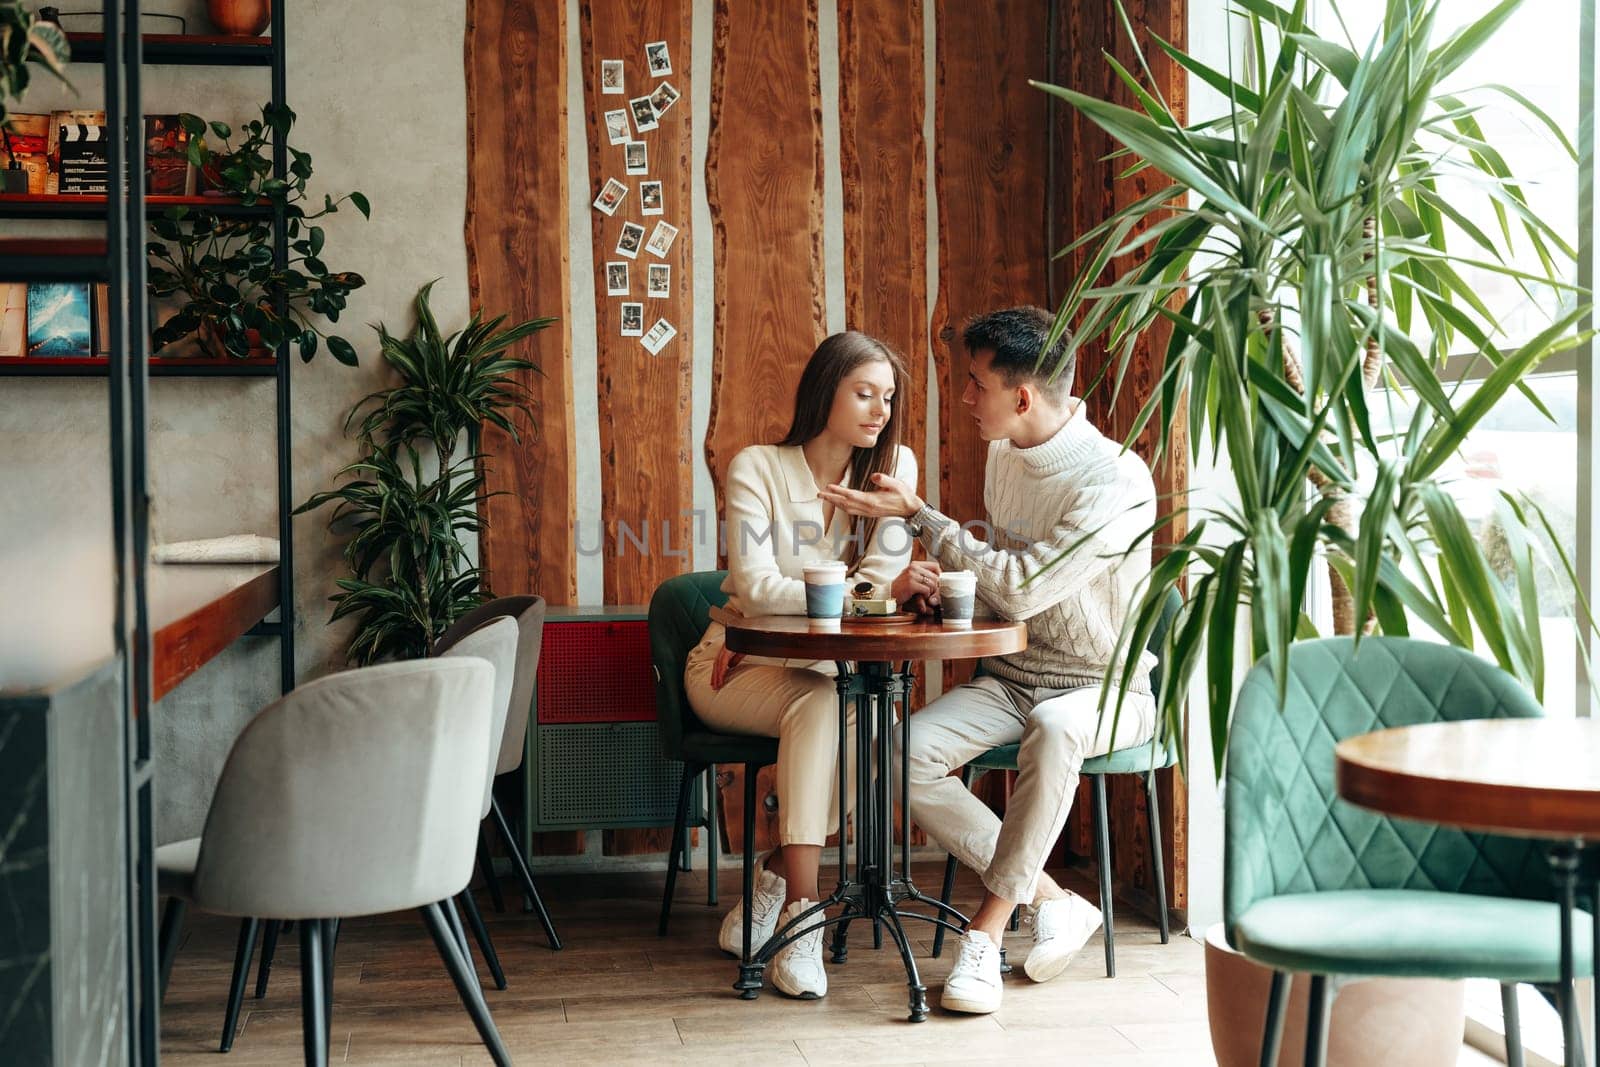 A smiling young couple sits closely together at a small table in a warmly lit cafe, sharing a moment over coffee. Surrounded by indoor plants and rustic decor, they seem engaged in a pleasant conversation, with a backdrop of draping curtains and a casual atmosphere.